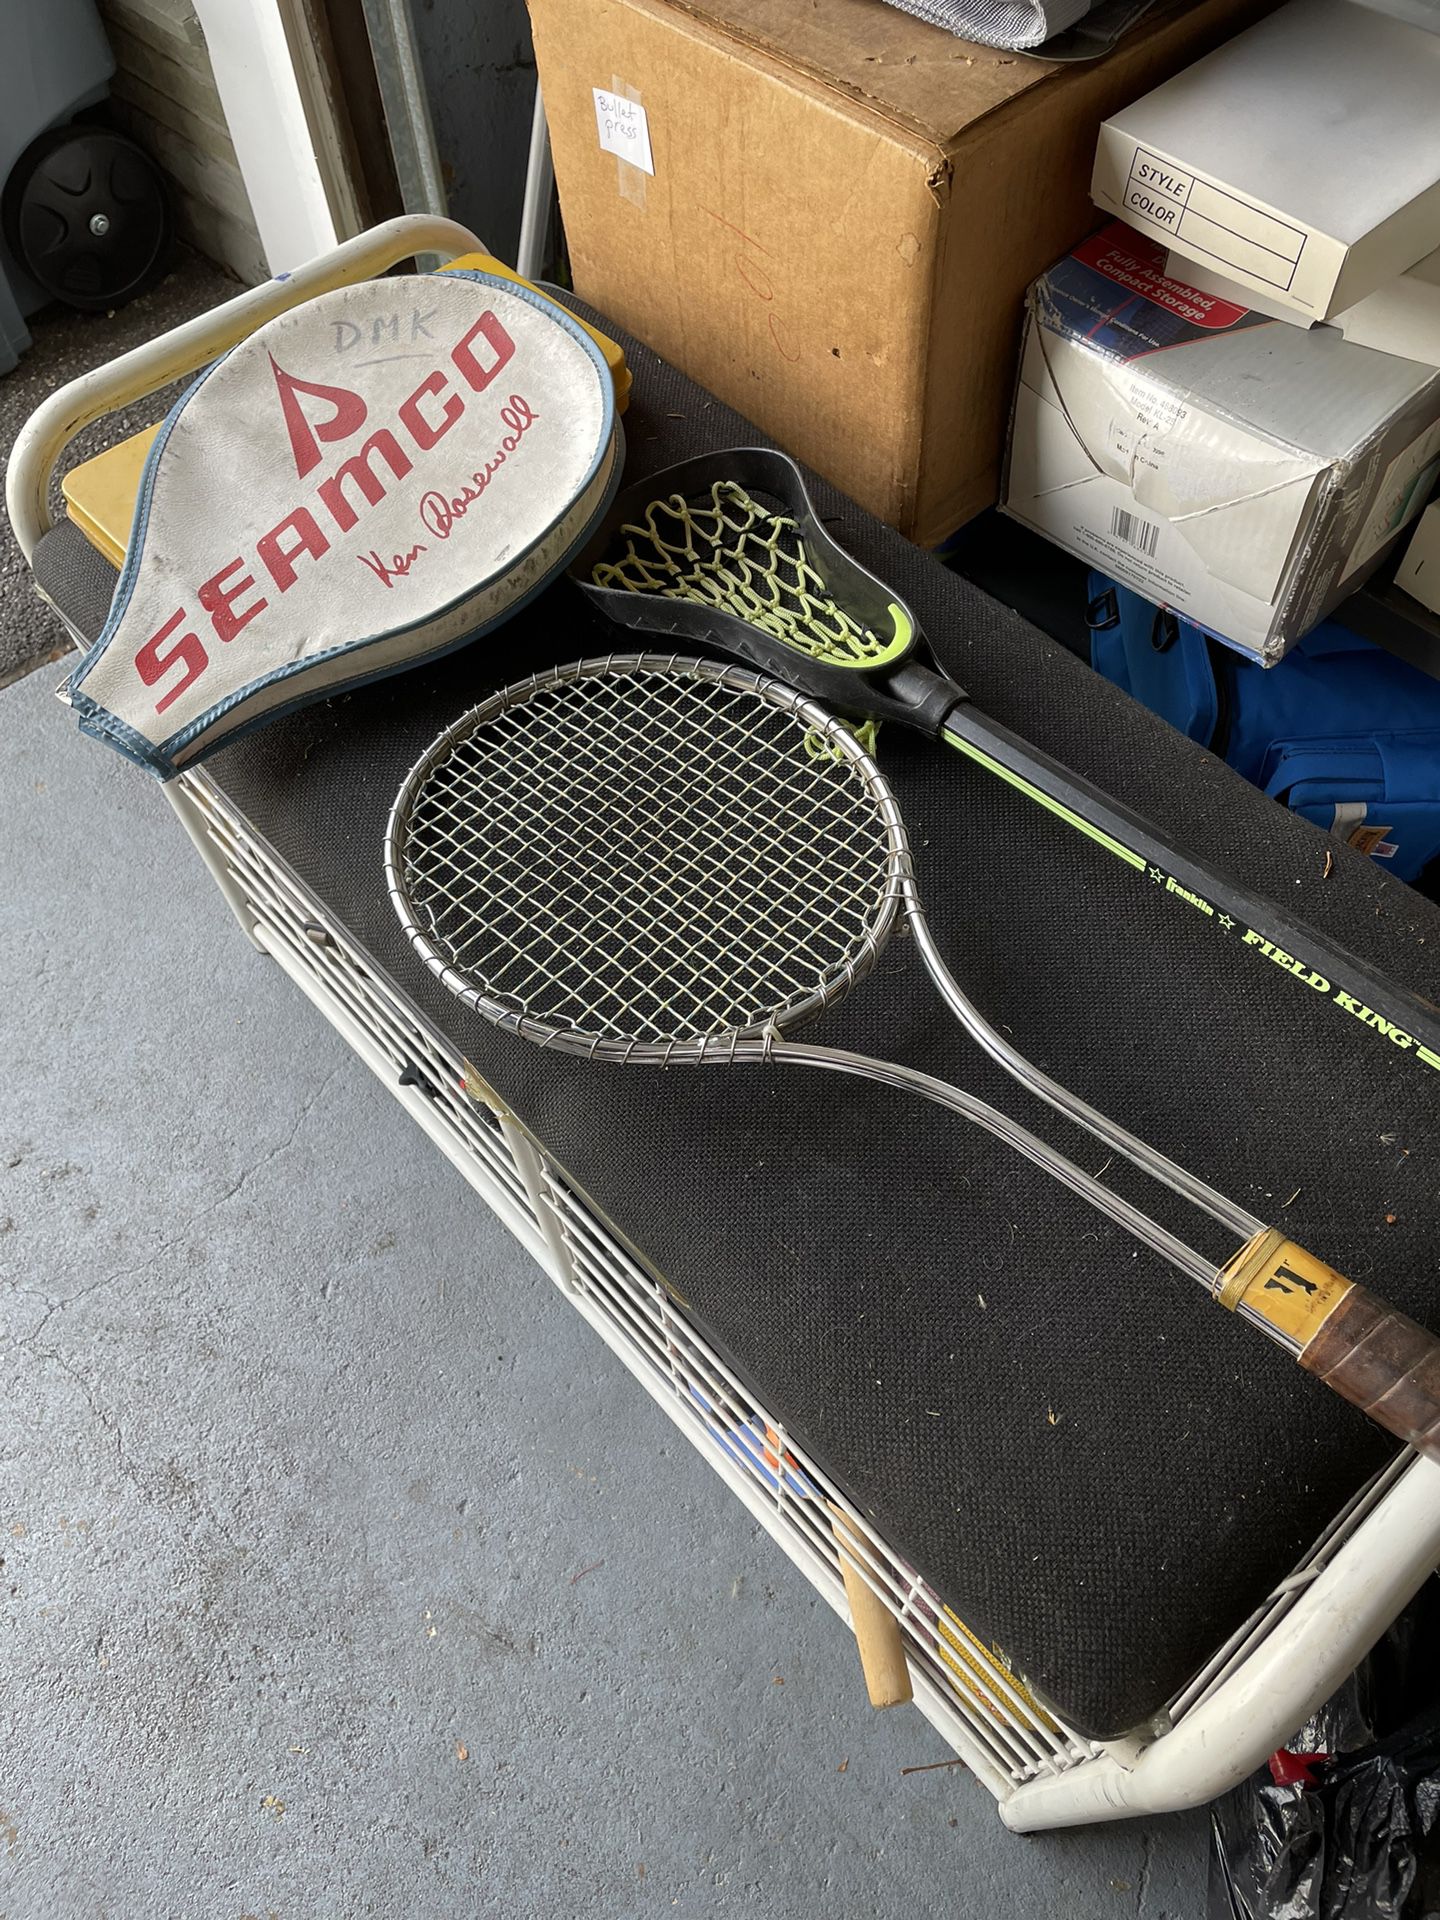 Tennis Racket and Lacrosse Stick